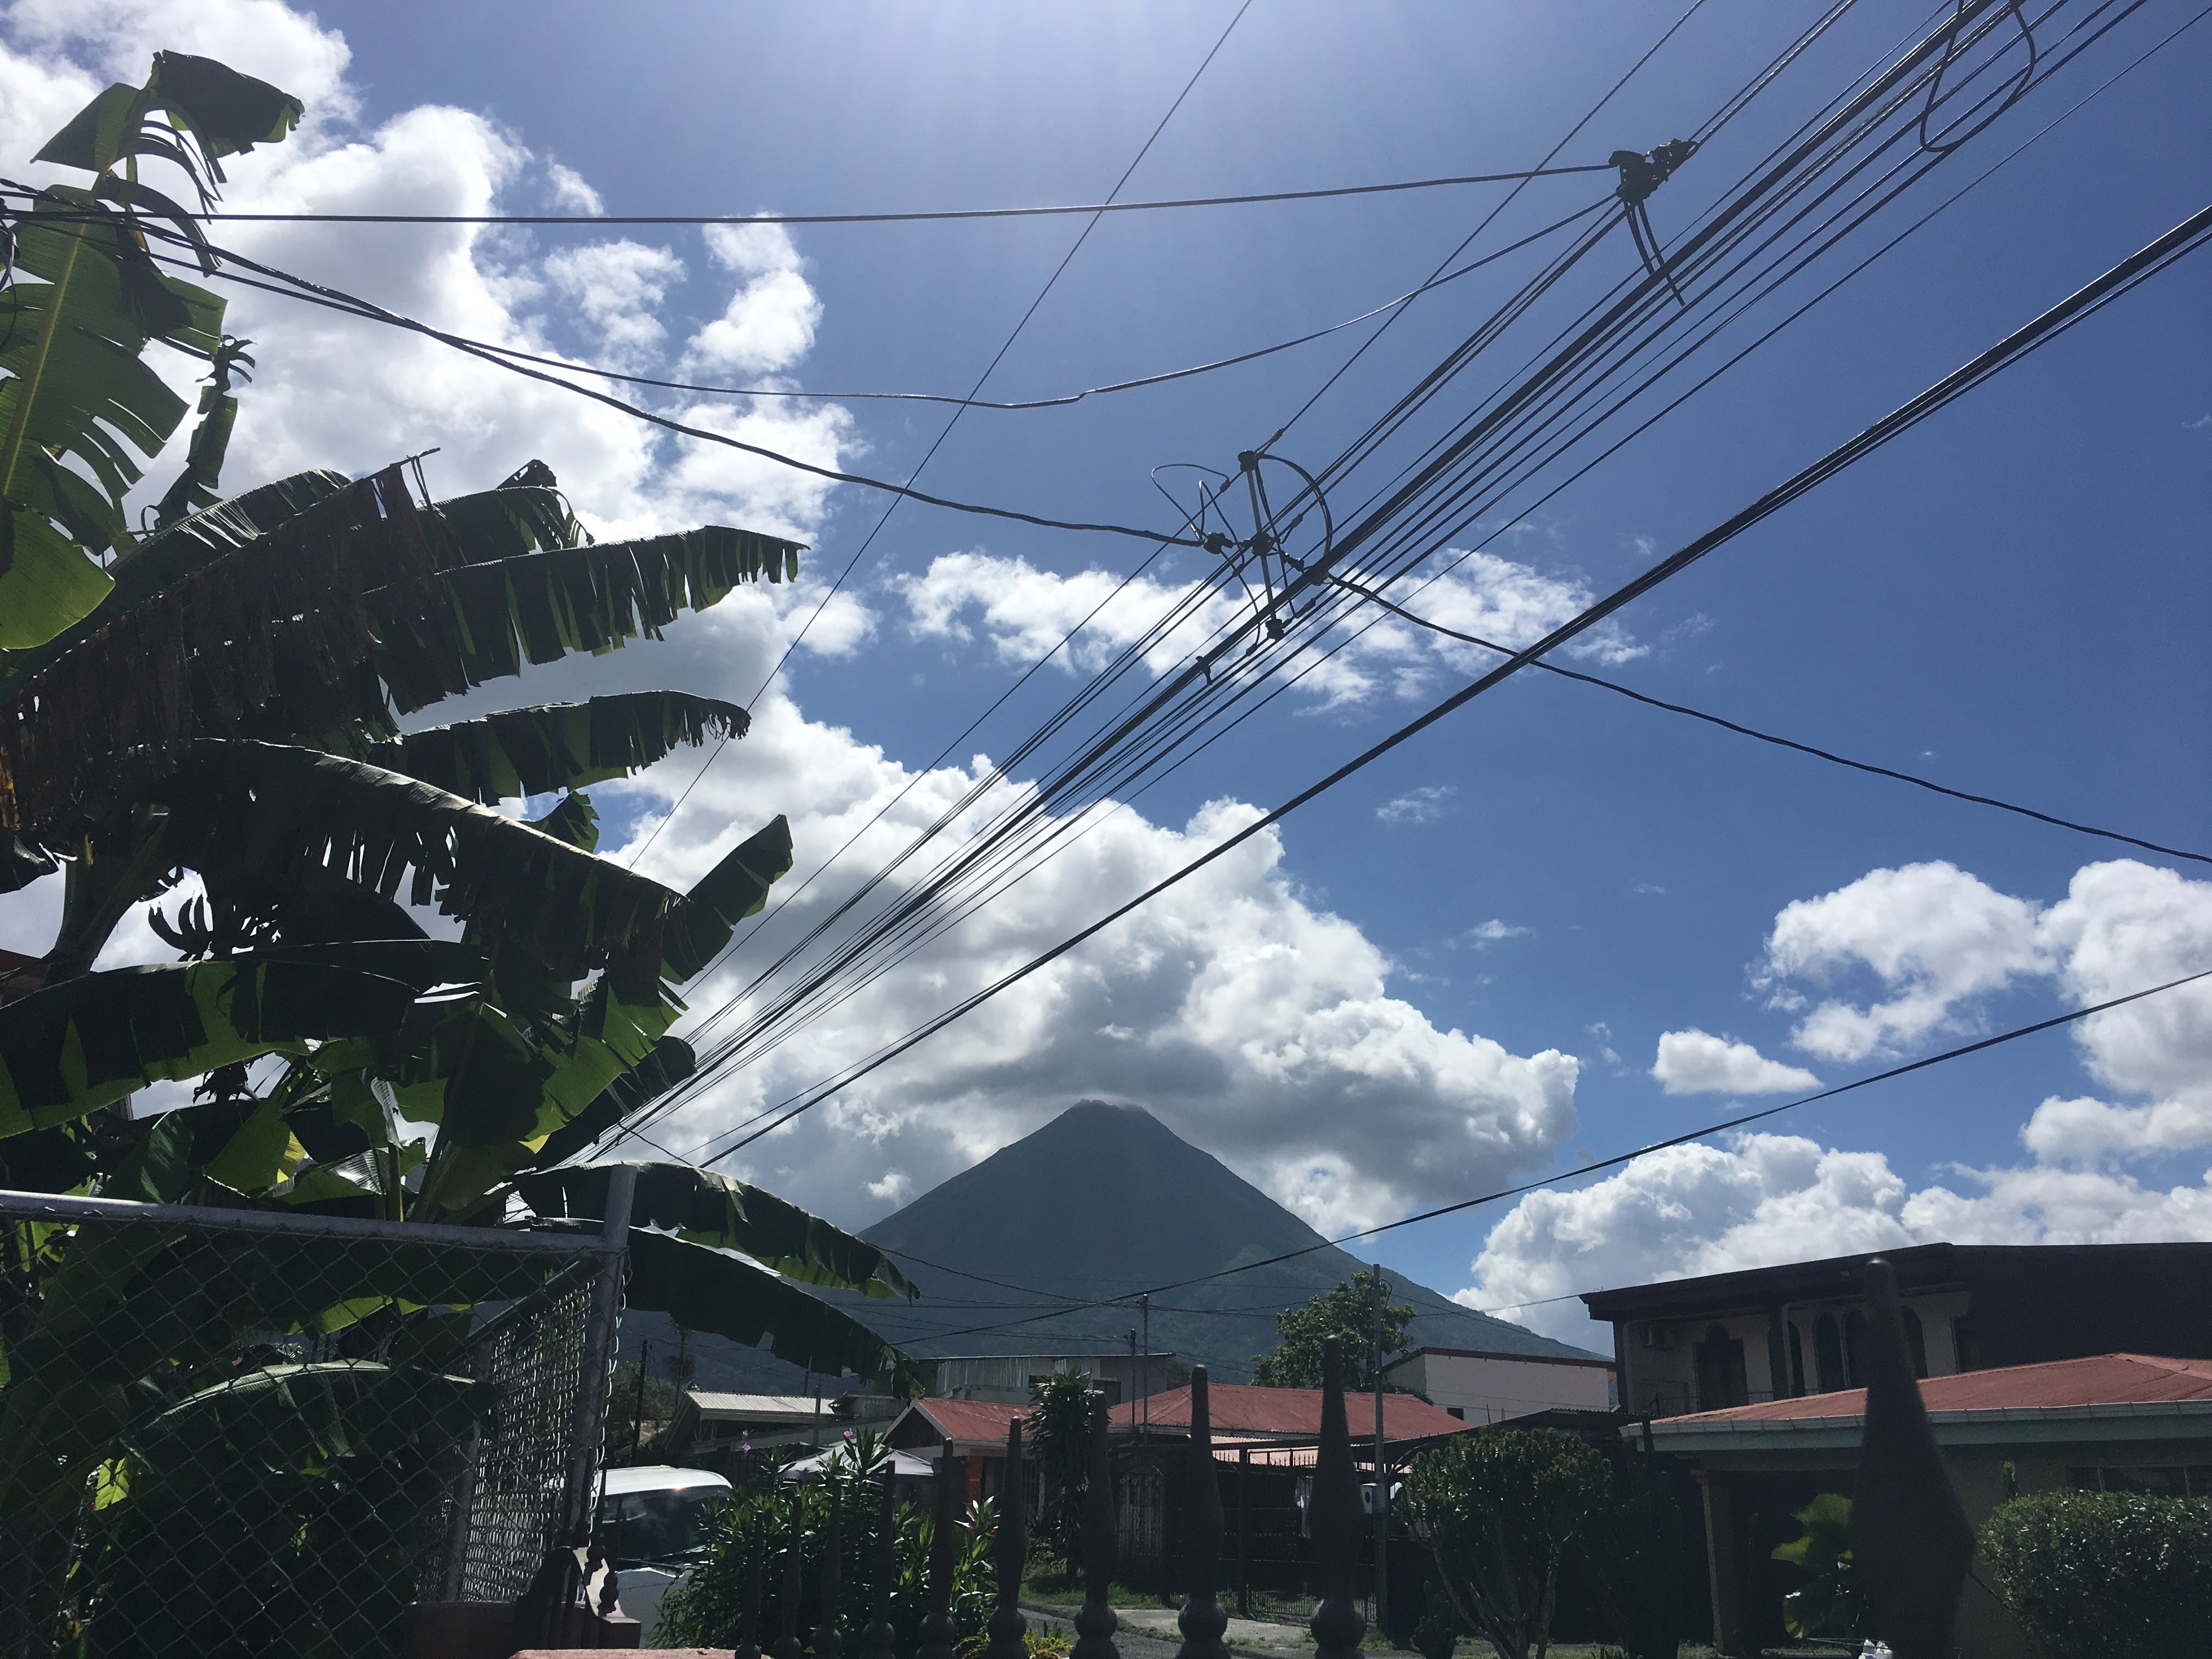 View from the house we rented in Arenal